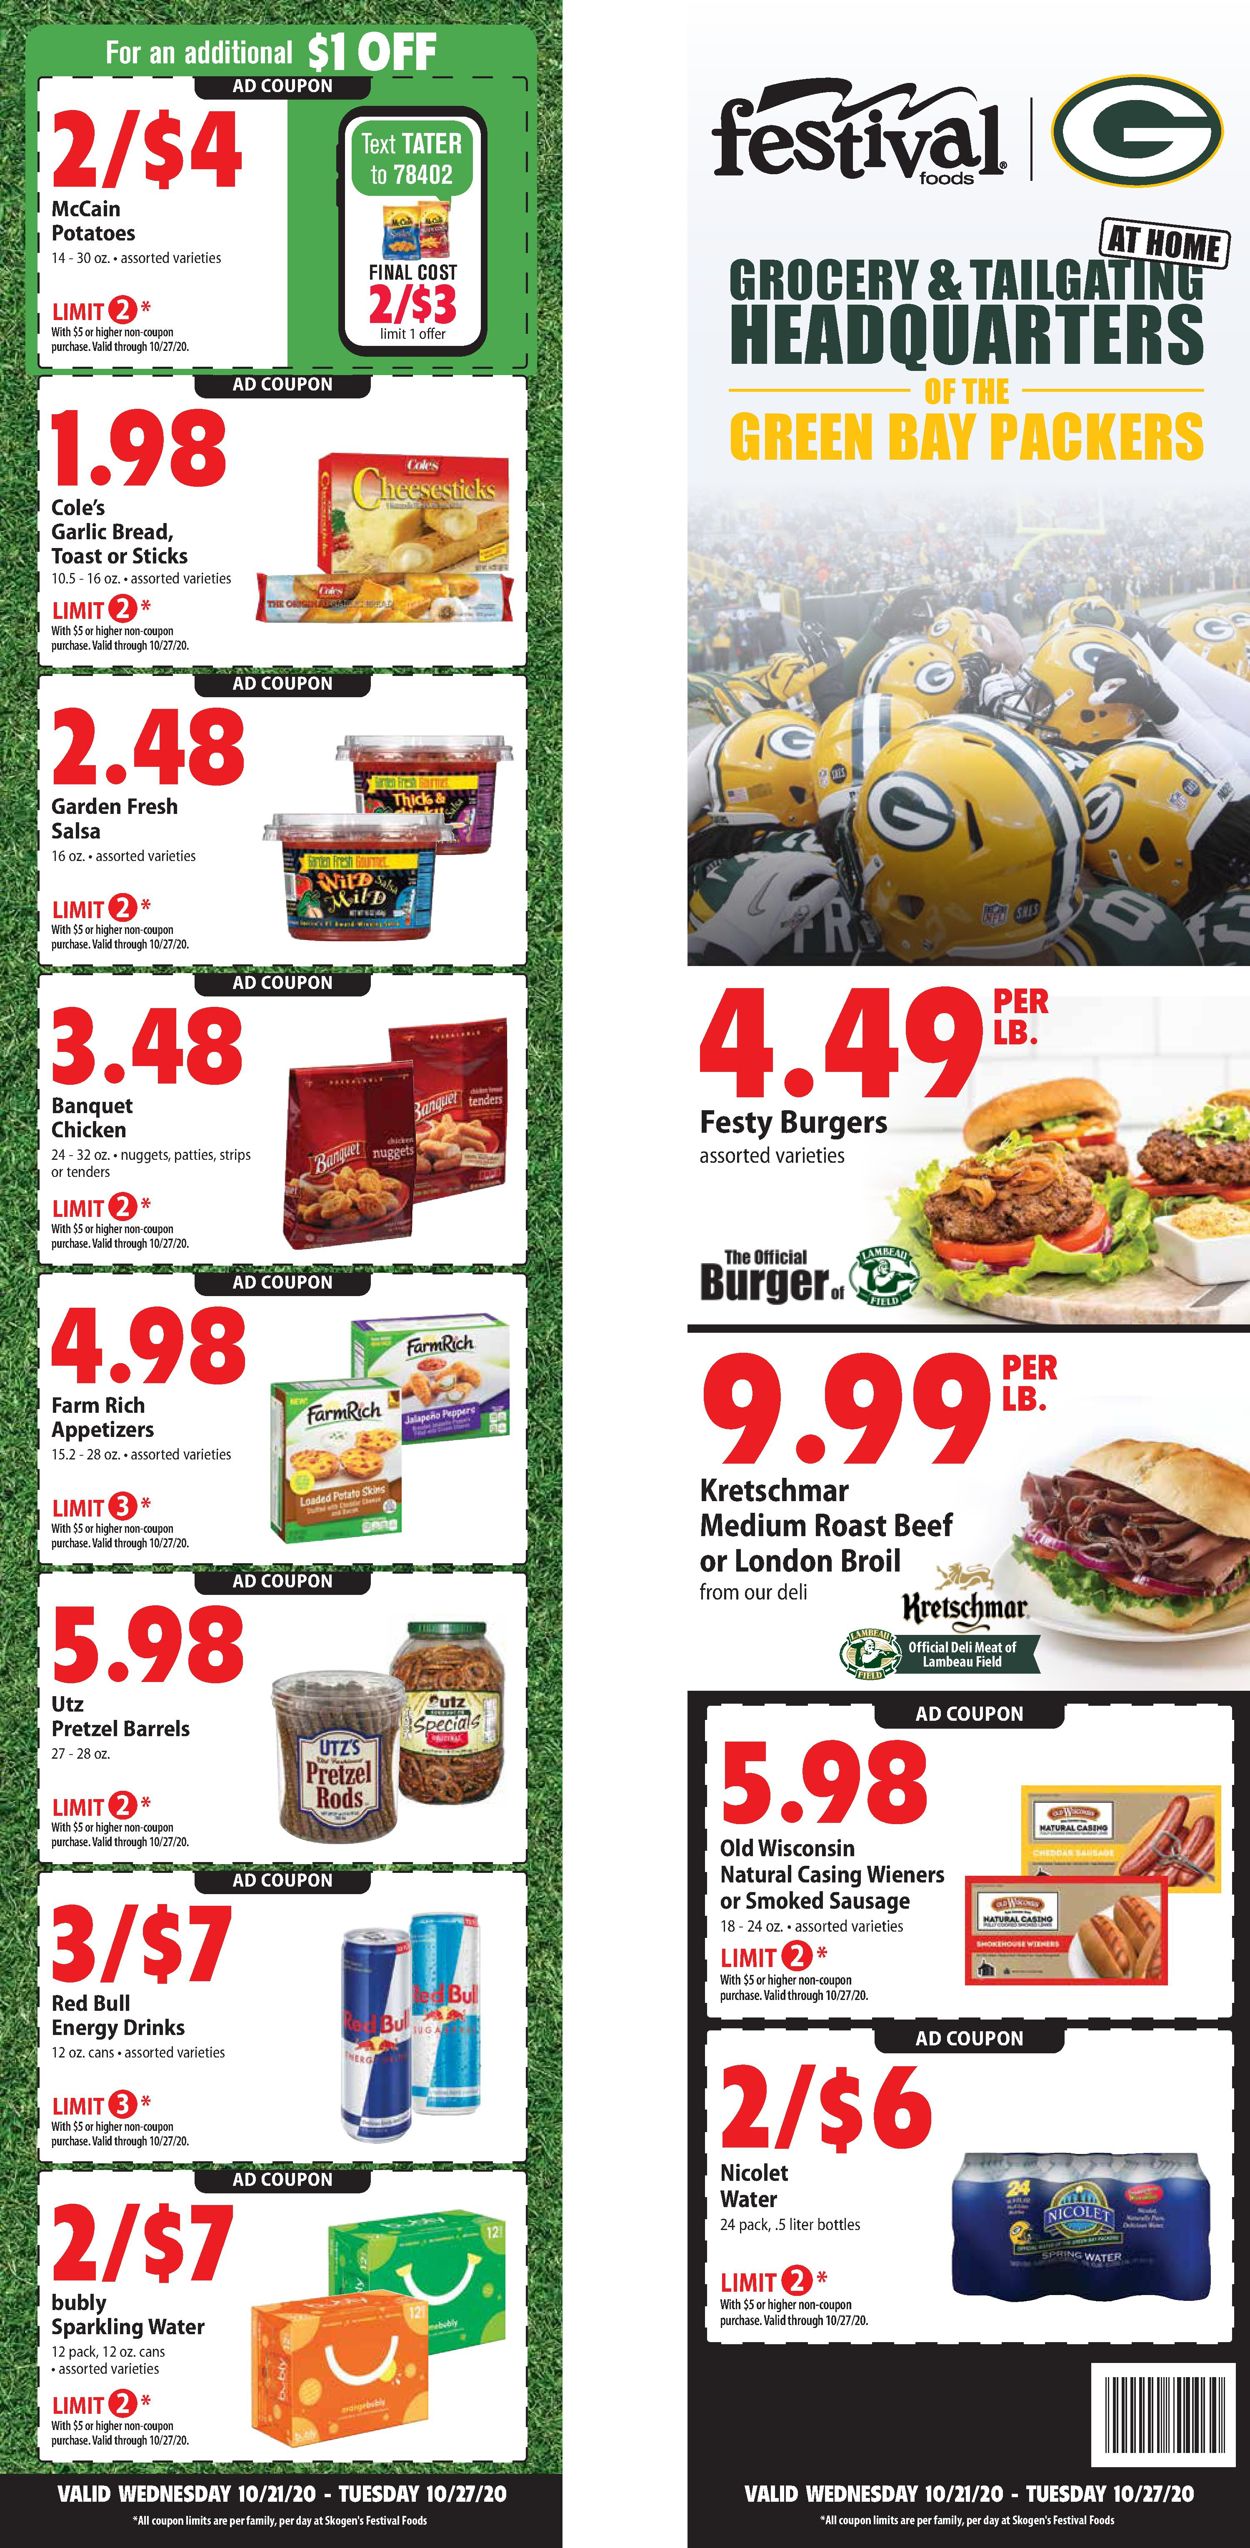 Festival Foods Current weekly ad 10/21 - 10/27/2020 - frequent-ads.com